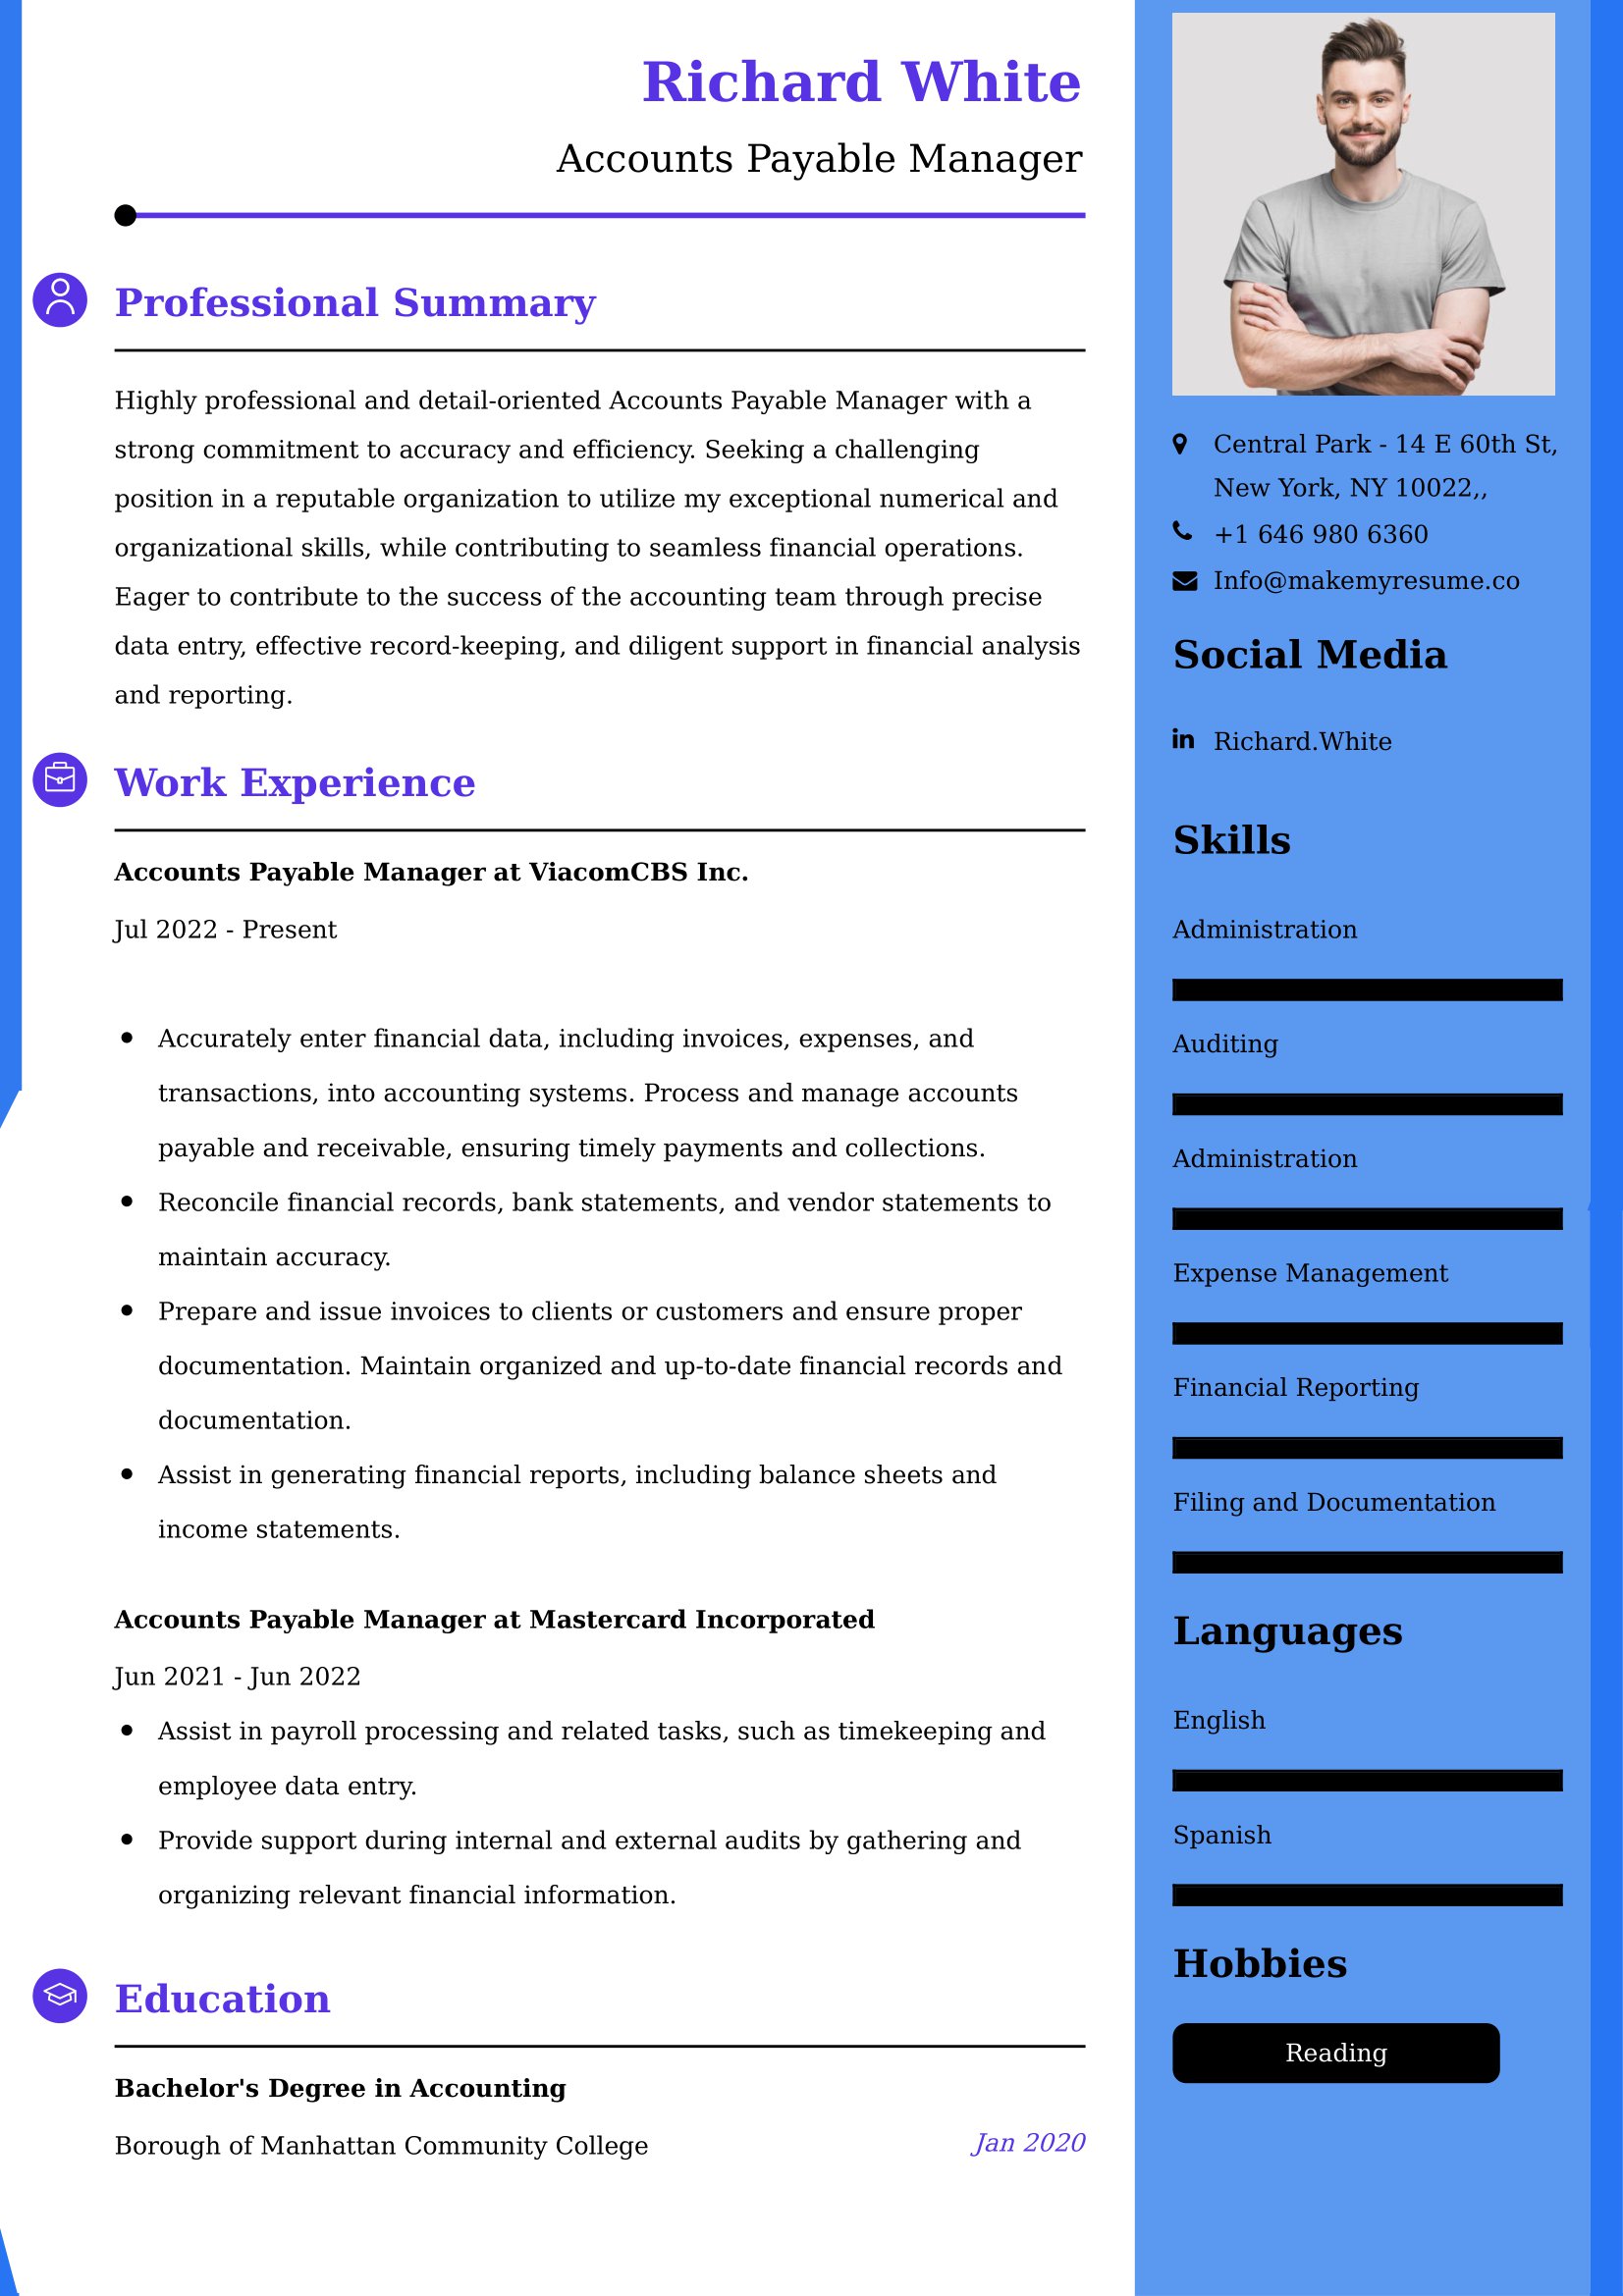 Accounts Payable Manager Resume Examples India